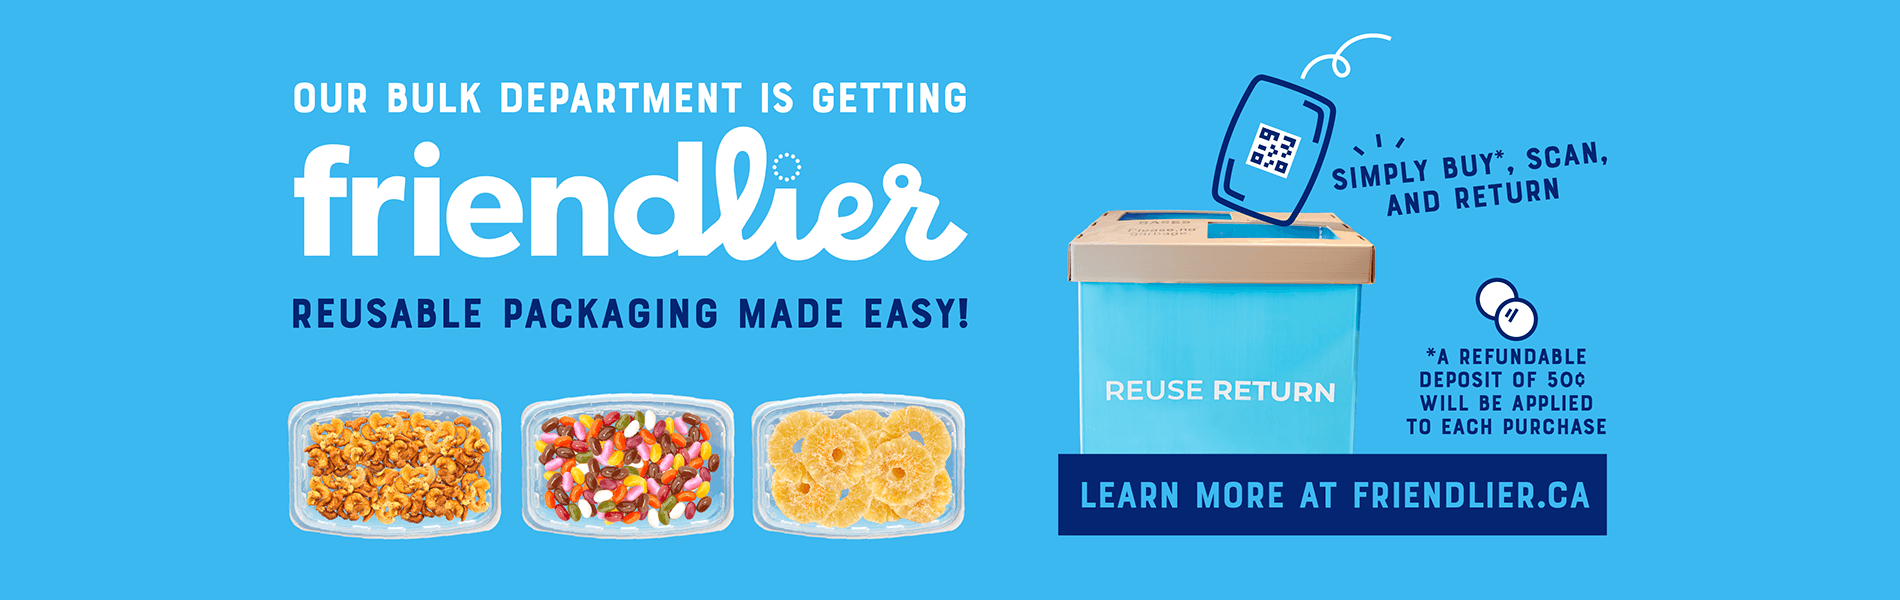 Our Bulk department is getting friendlier! Reusable packaging made easy - simply buy, scan, and return. A refundable deposit of 50¢ will be applied to each purchase. Learn more at friendlier.ca